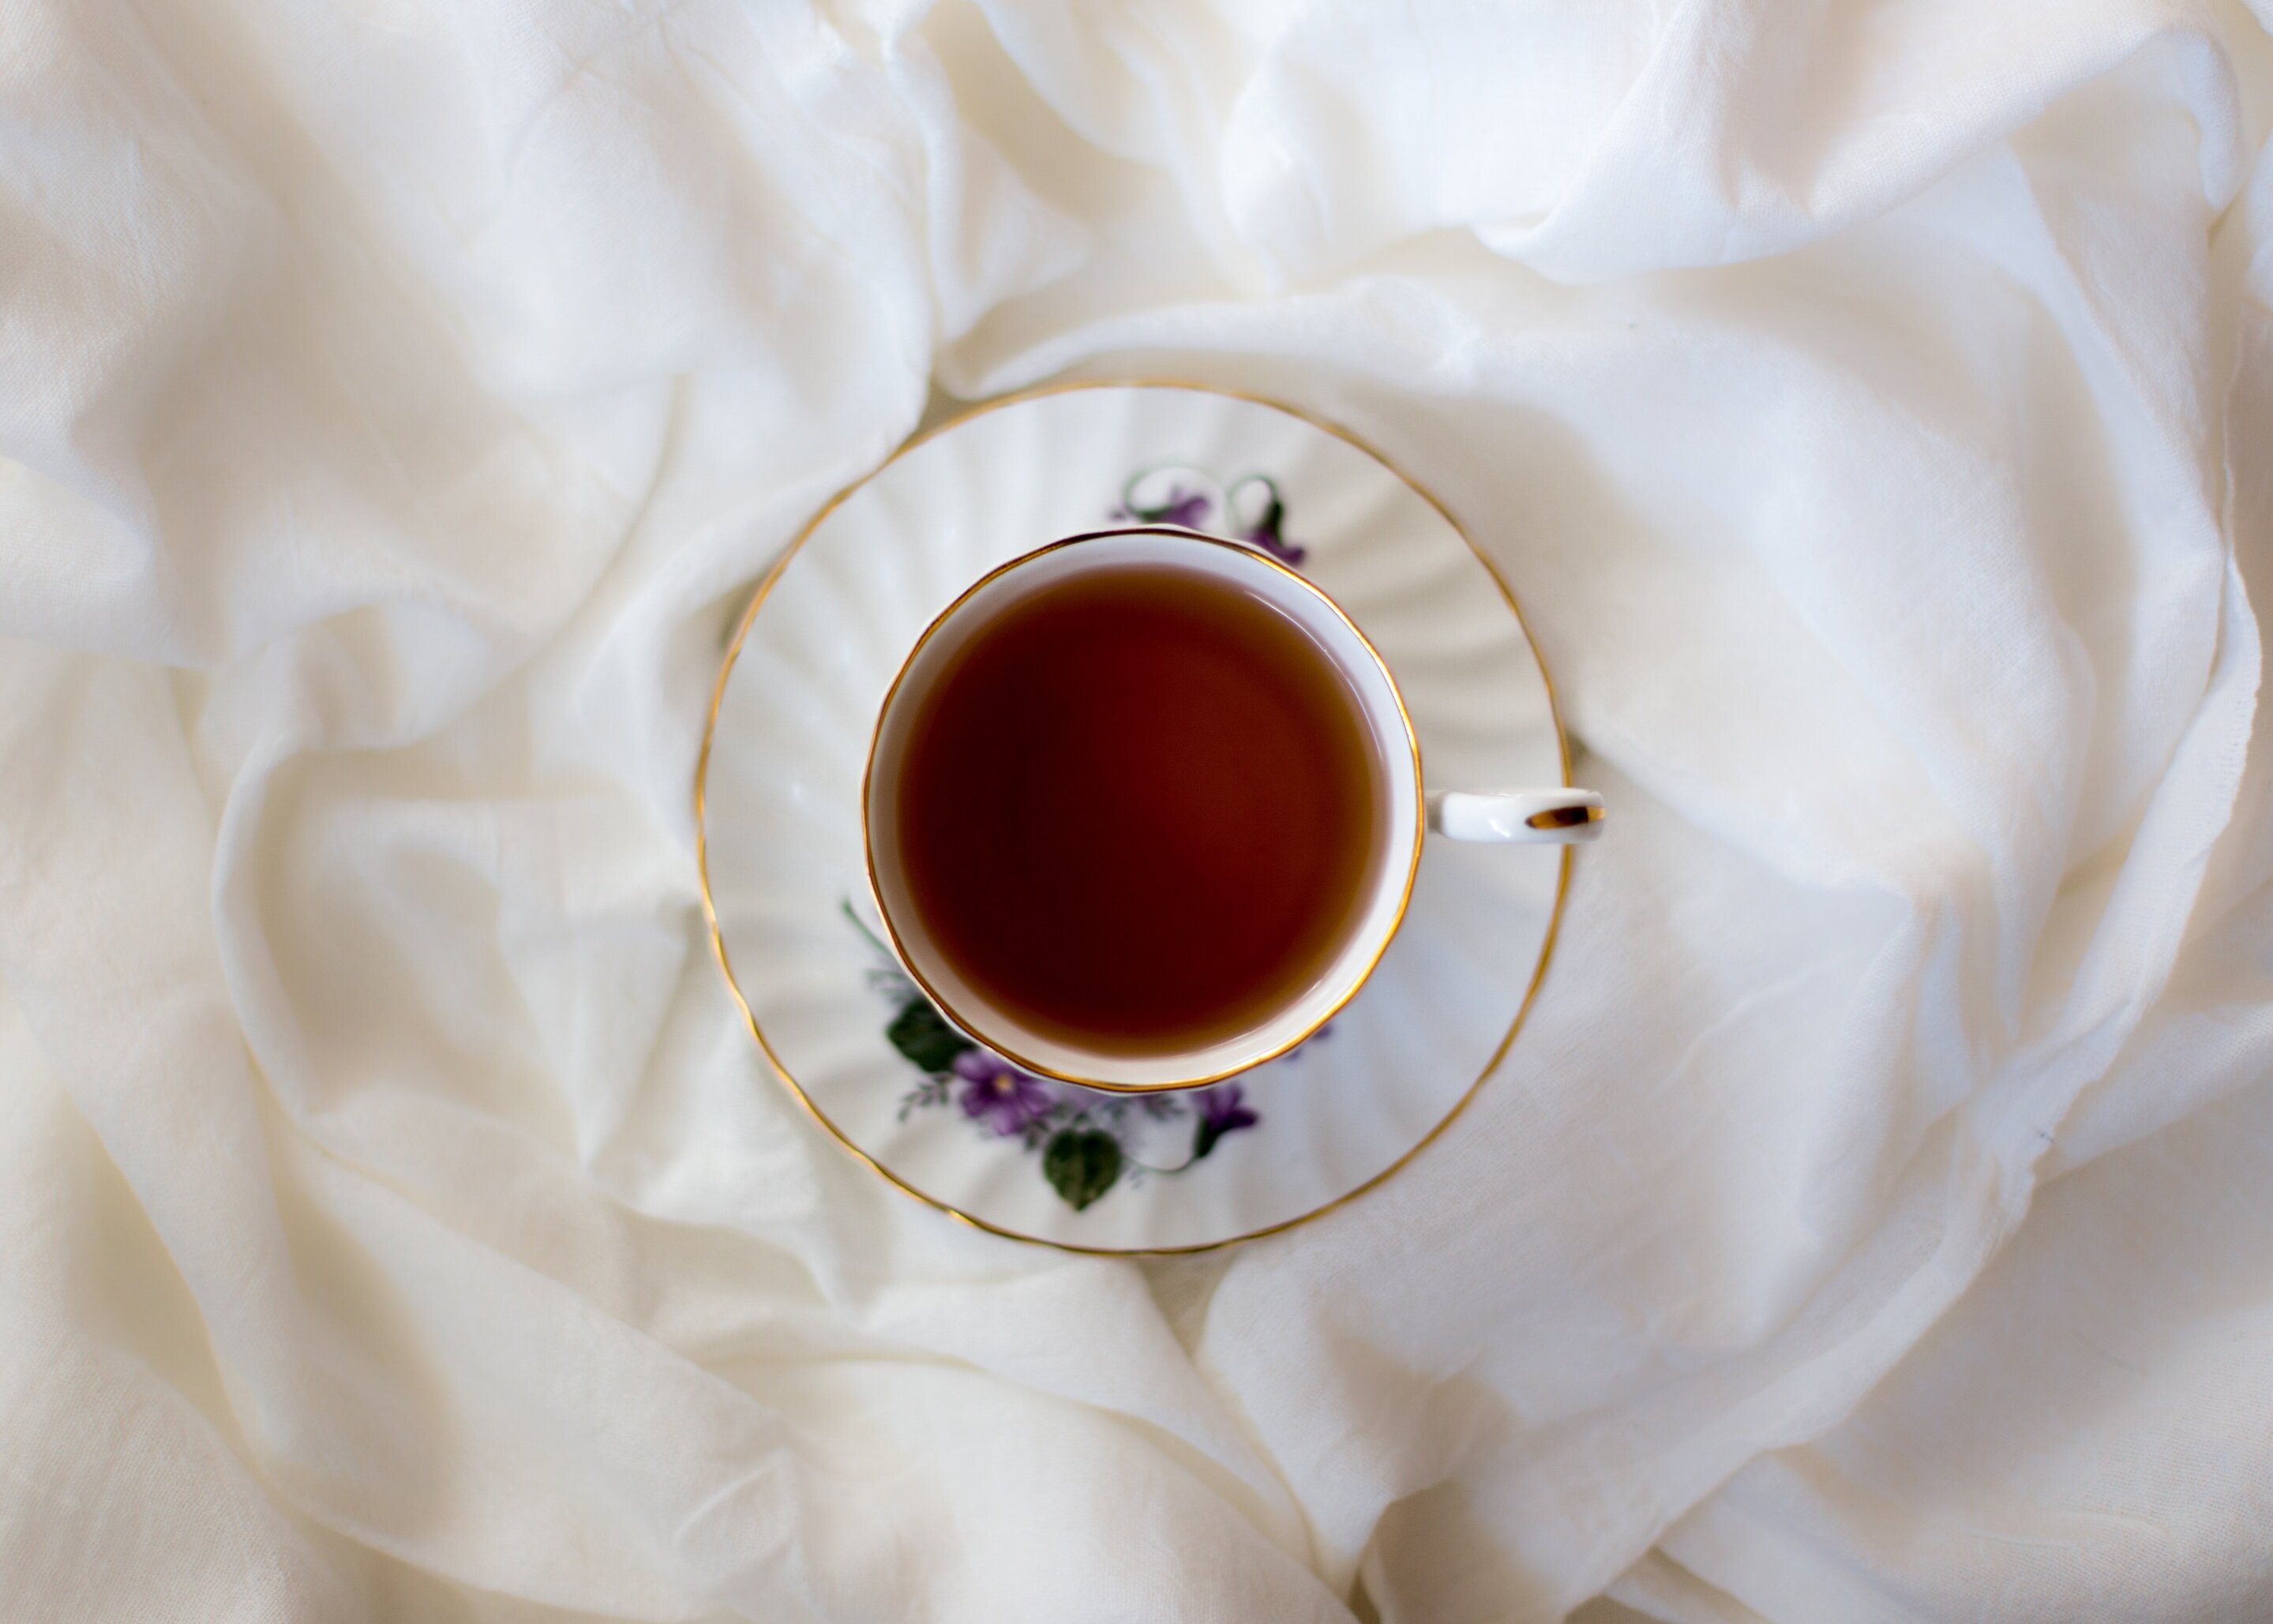 #Drinking black tea may be associated with lower mortality risk